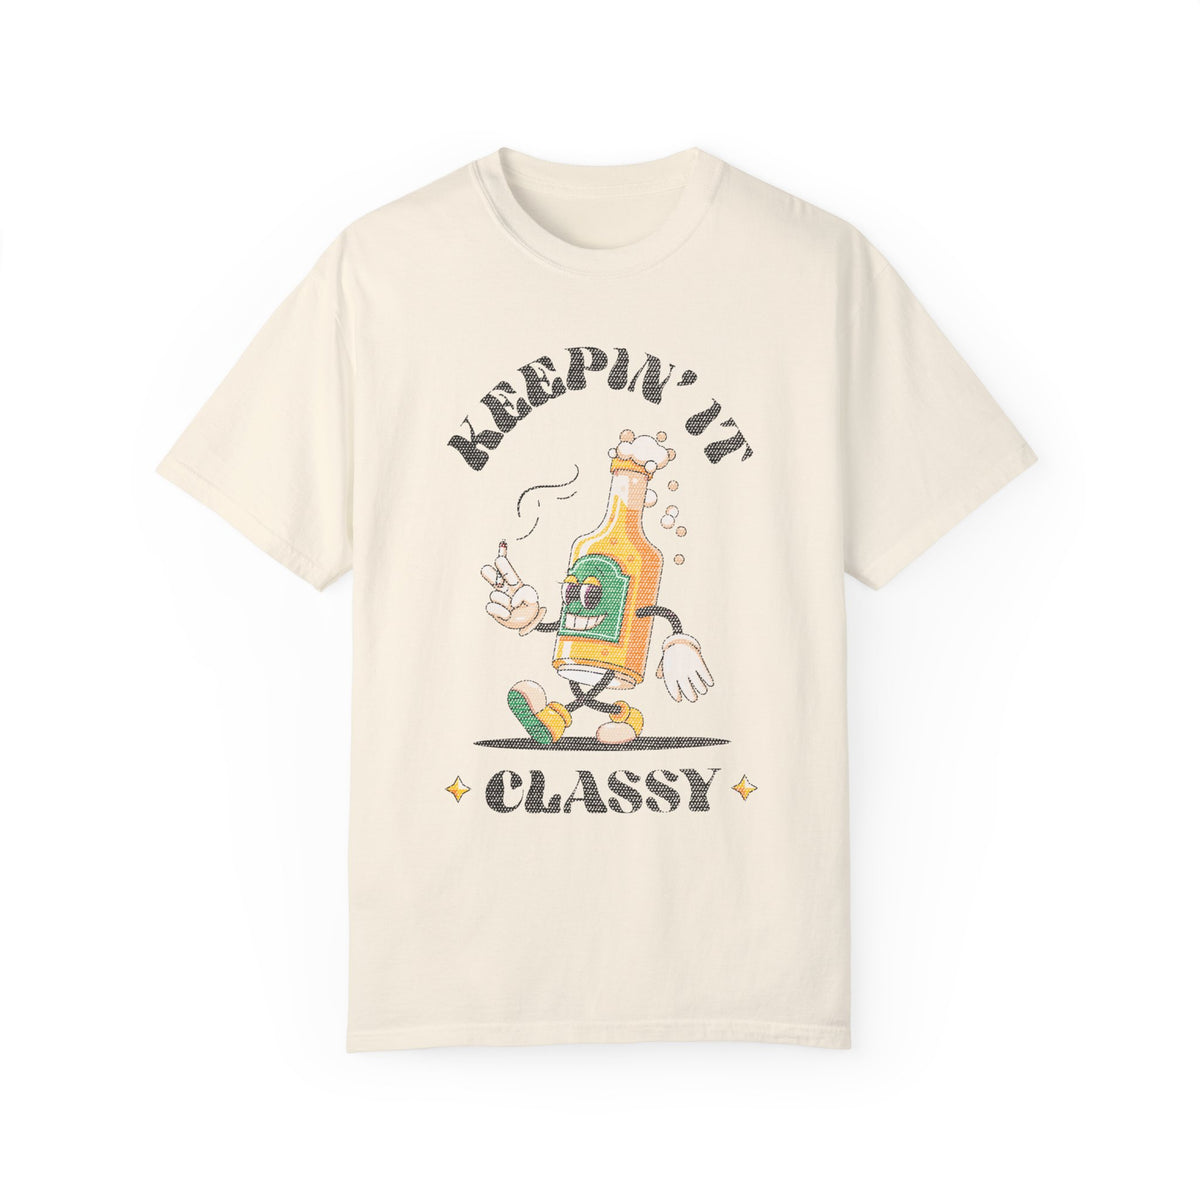 Keepin' It Classy | Funny Graphic T-shirt | Comfort Colors